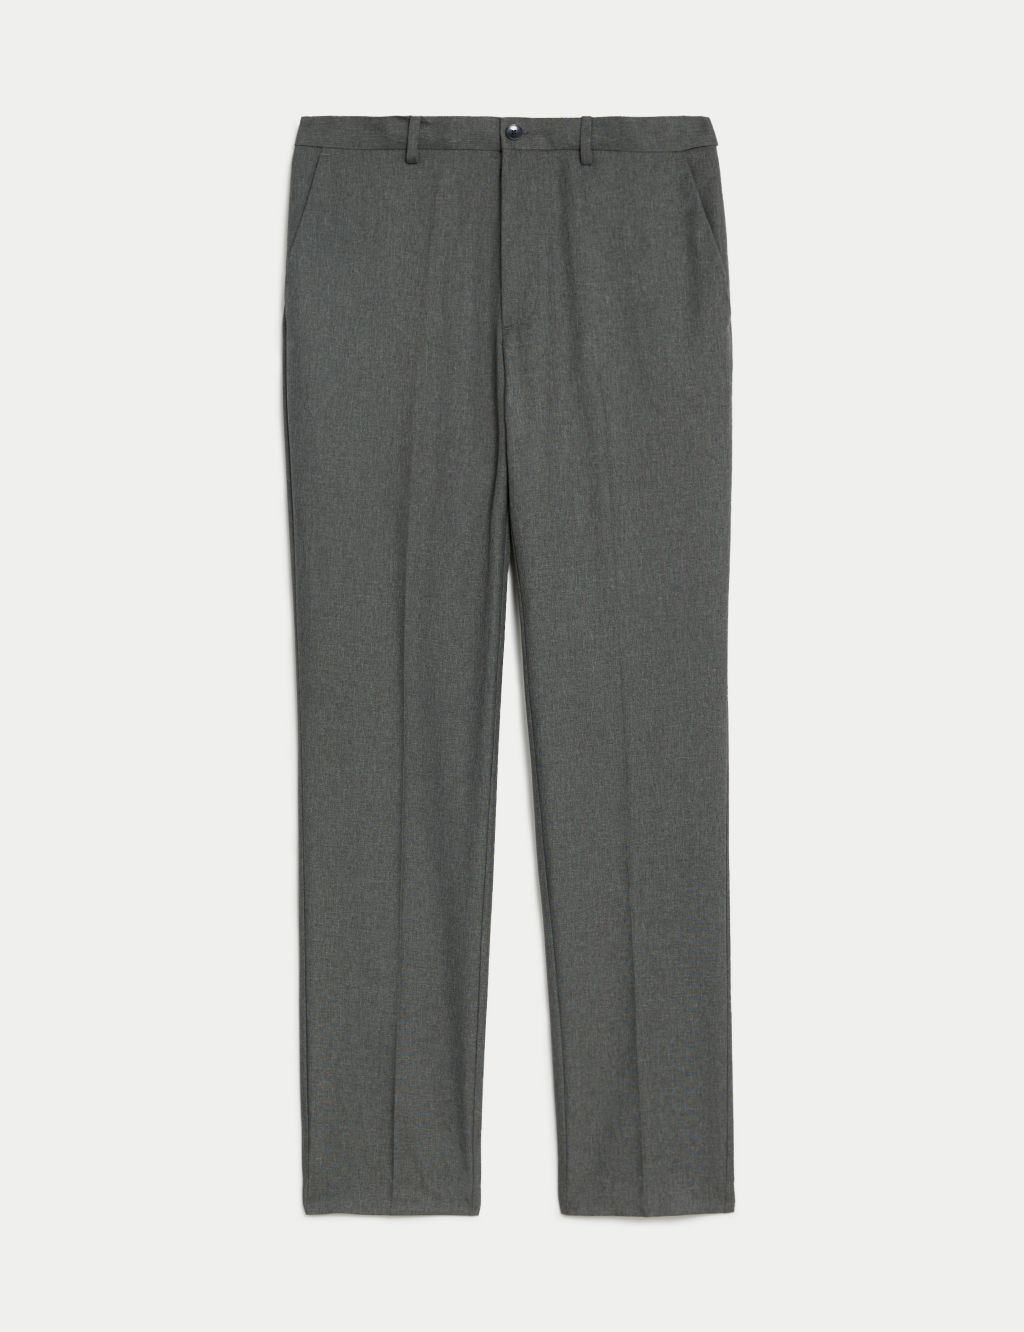 Slim Fit Trouser with Active Waist image 2